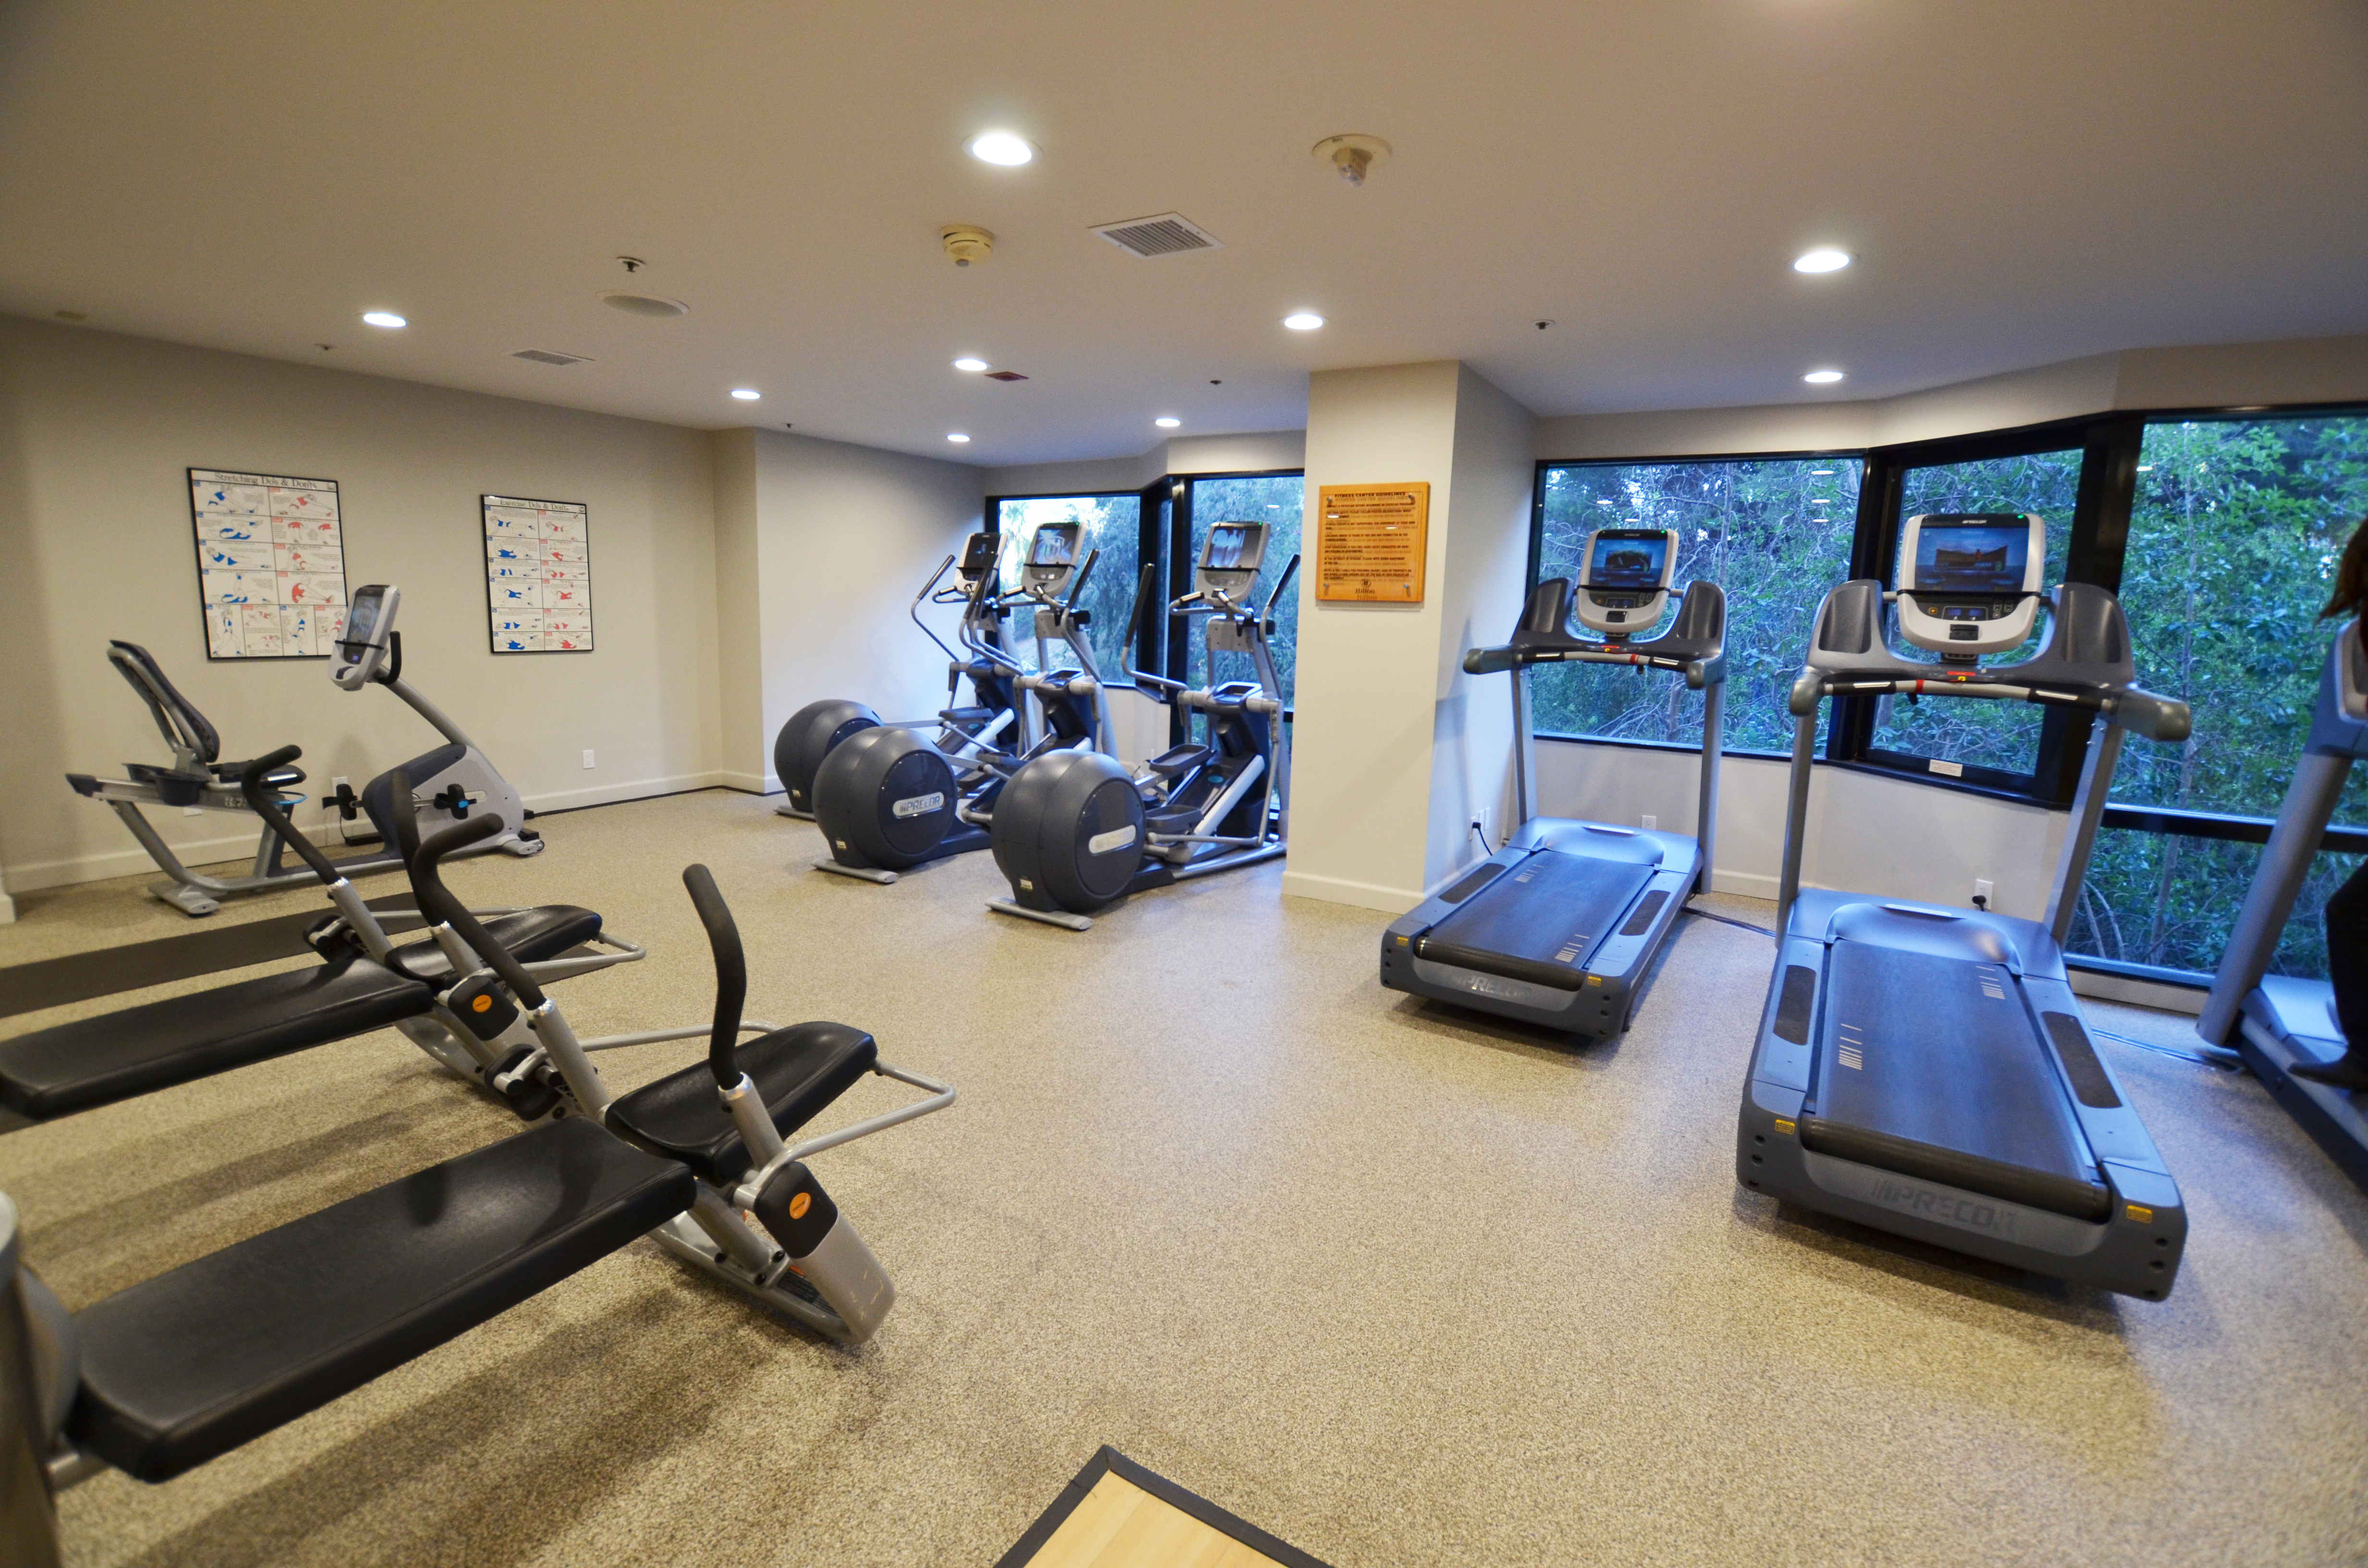 Fitness Center with Treadmills, Cross-trainers, Cycle Machine and Weight Benches